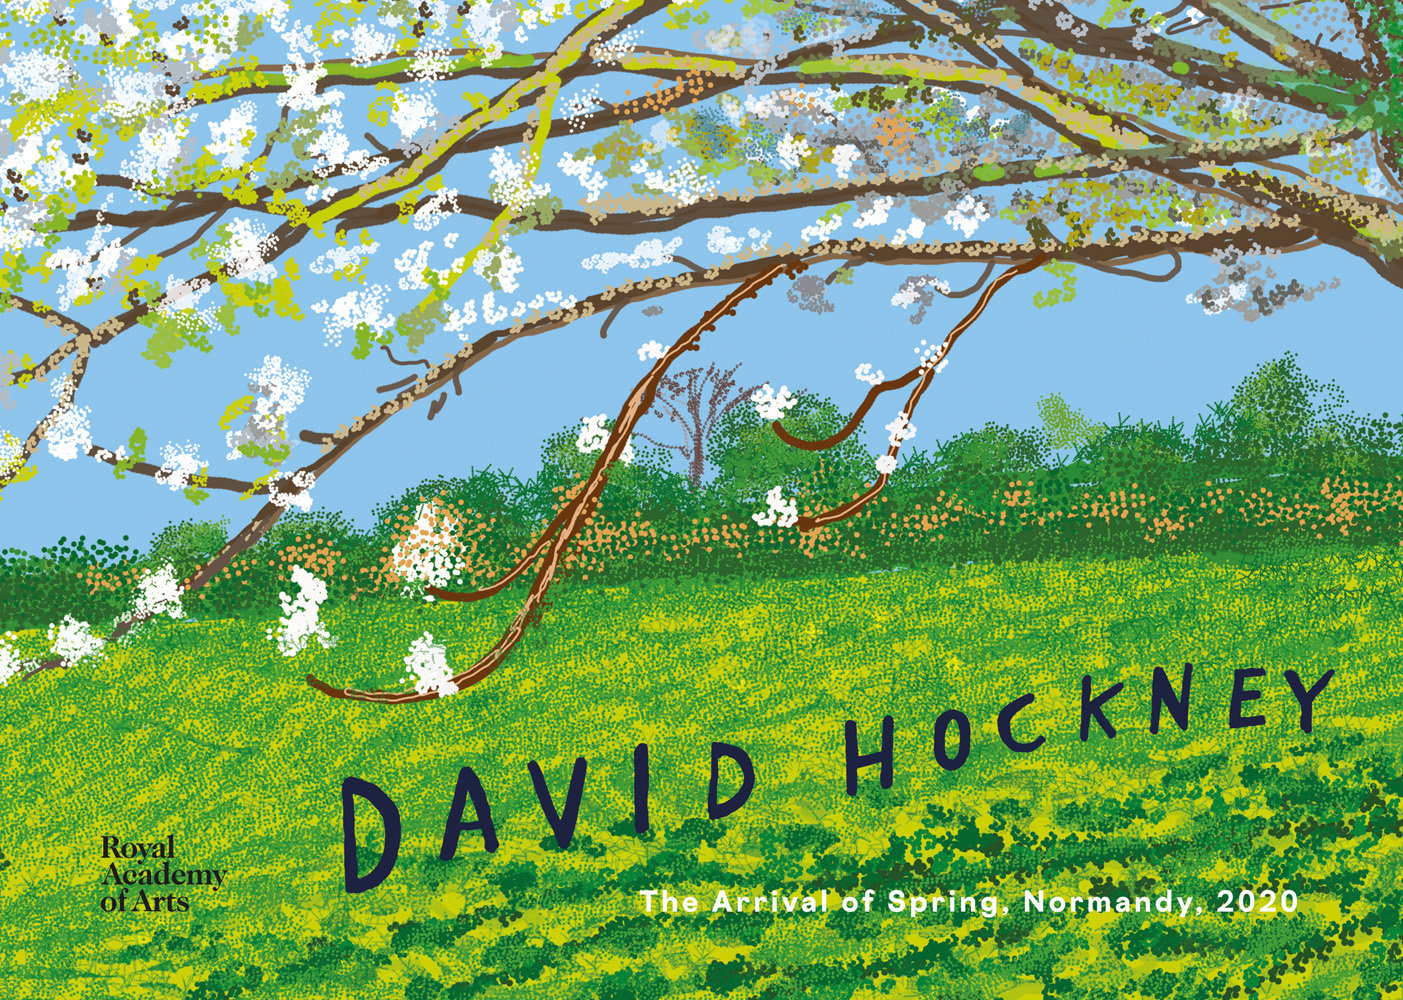 Digital iPad painting of white blossom tree arching over green landscape with David Hockney in dark blue naïve font